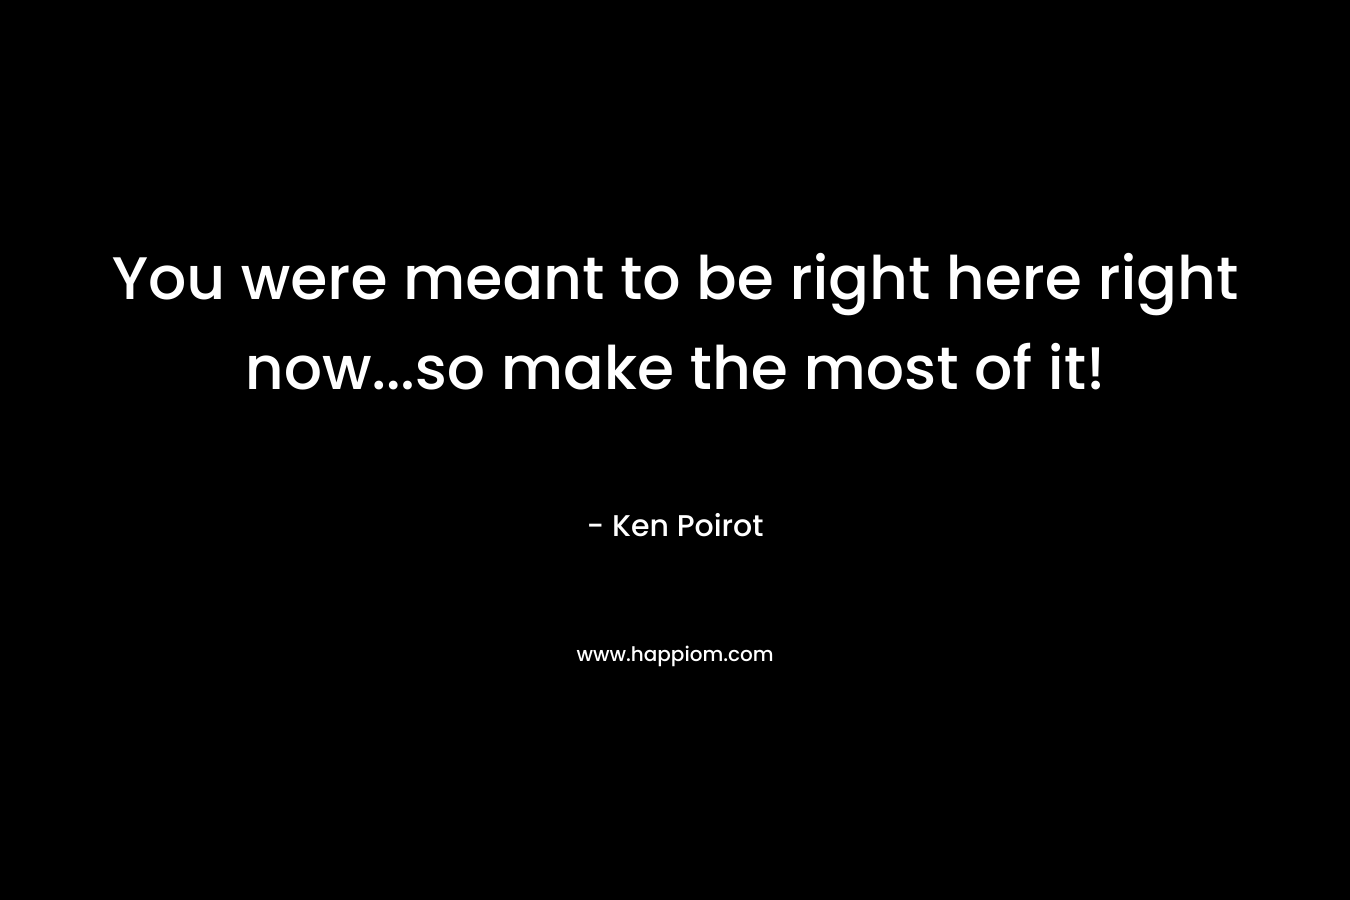 You were meant to be right here right now...so make the most of it!